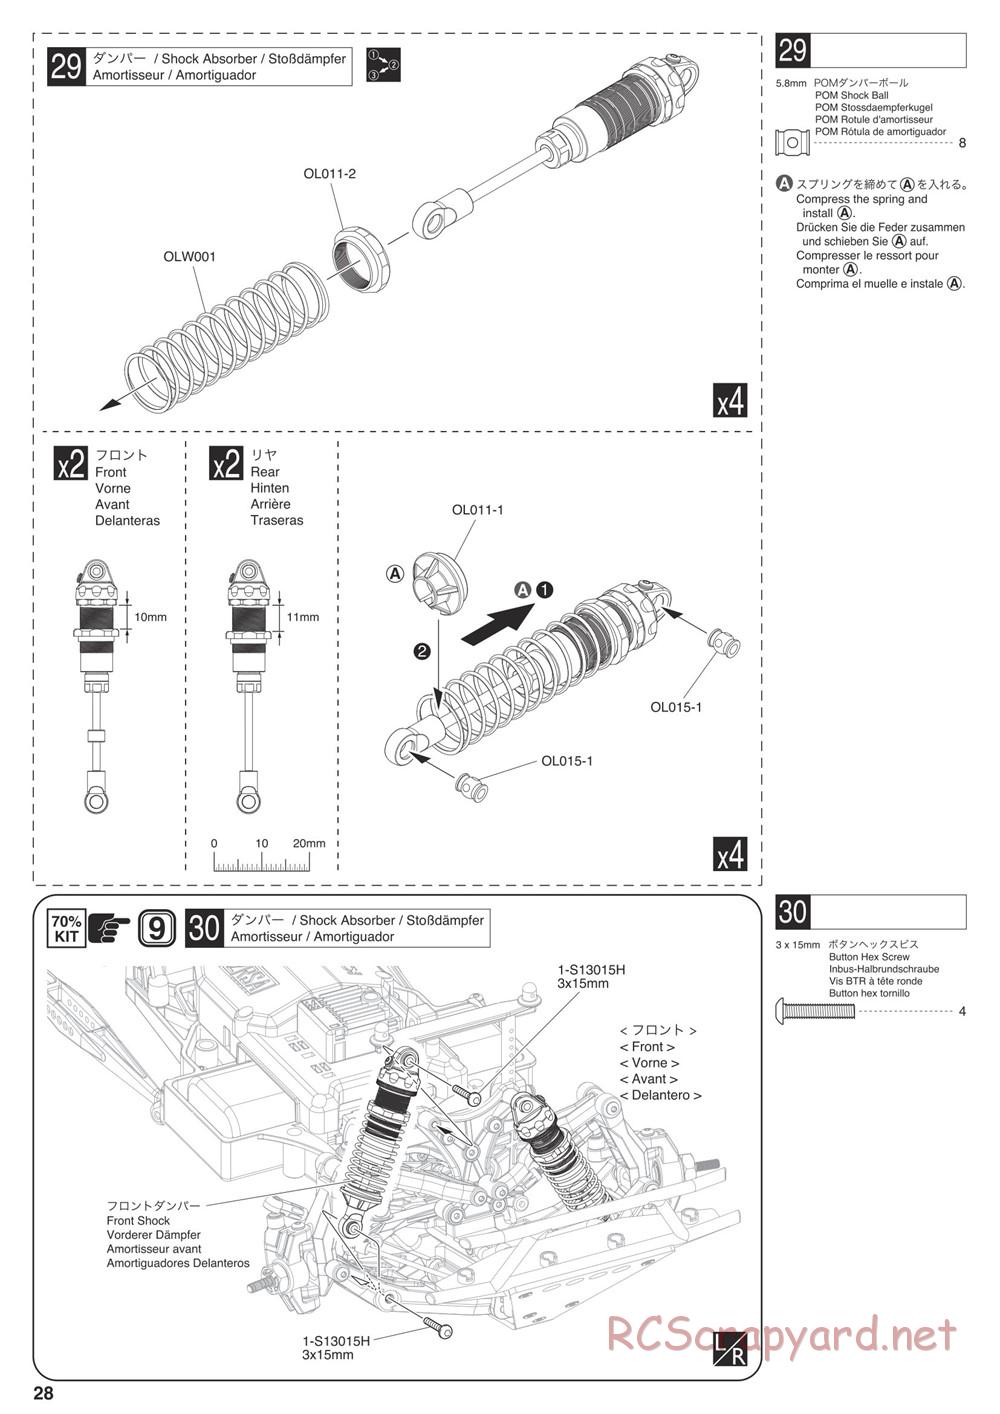 Kyosho - Outlaw Rampage Pro - Manual - Page 28